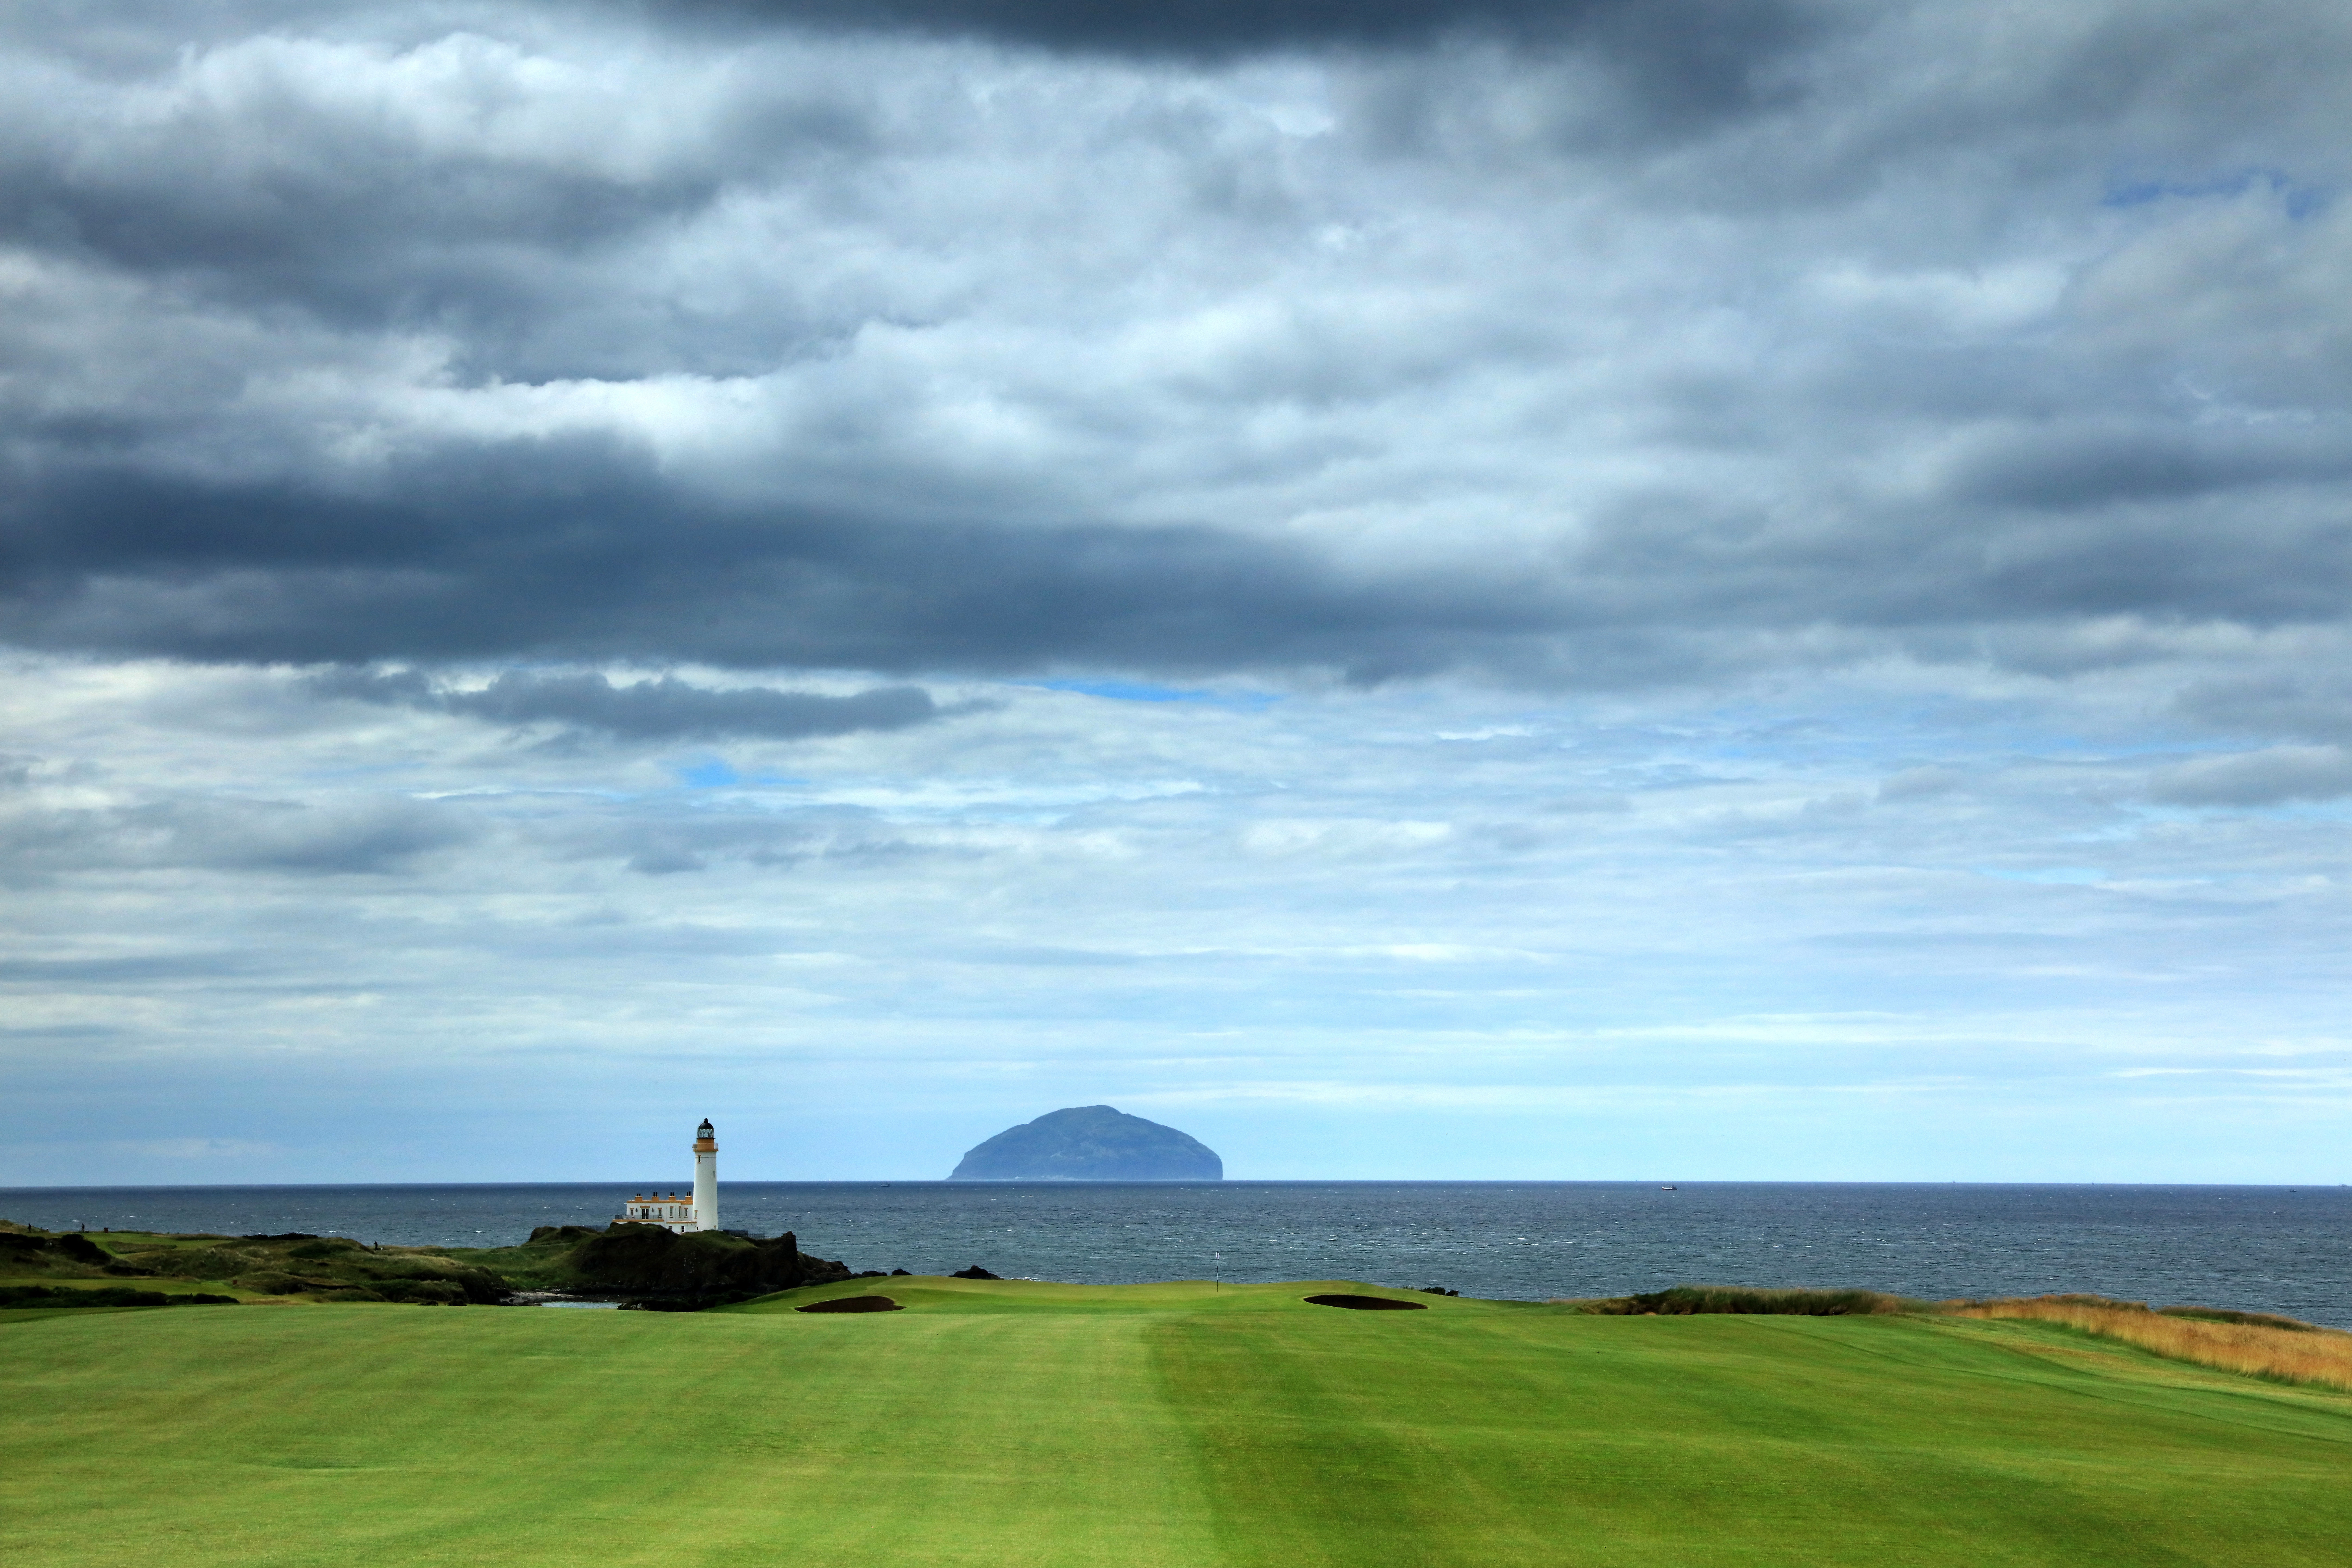 Trump's Turnberry golf course in Scotland.